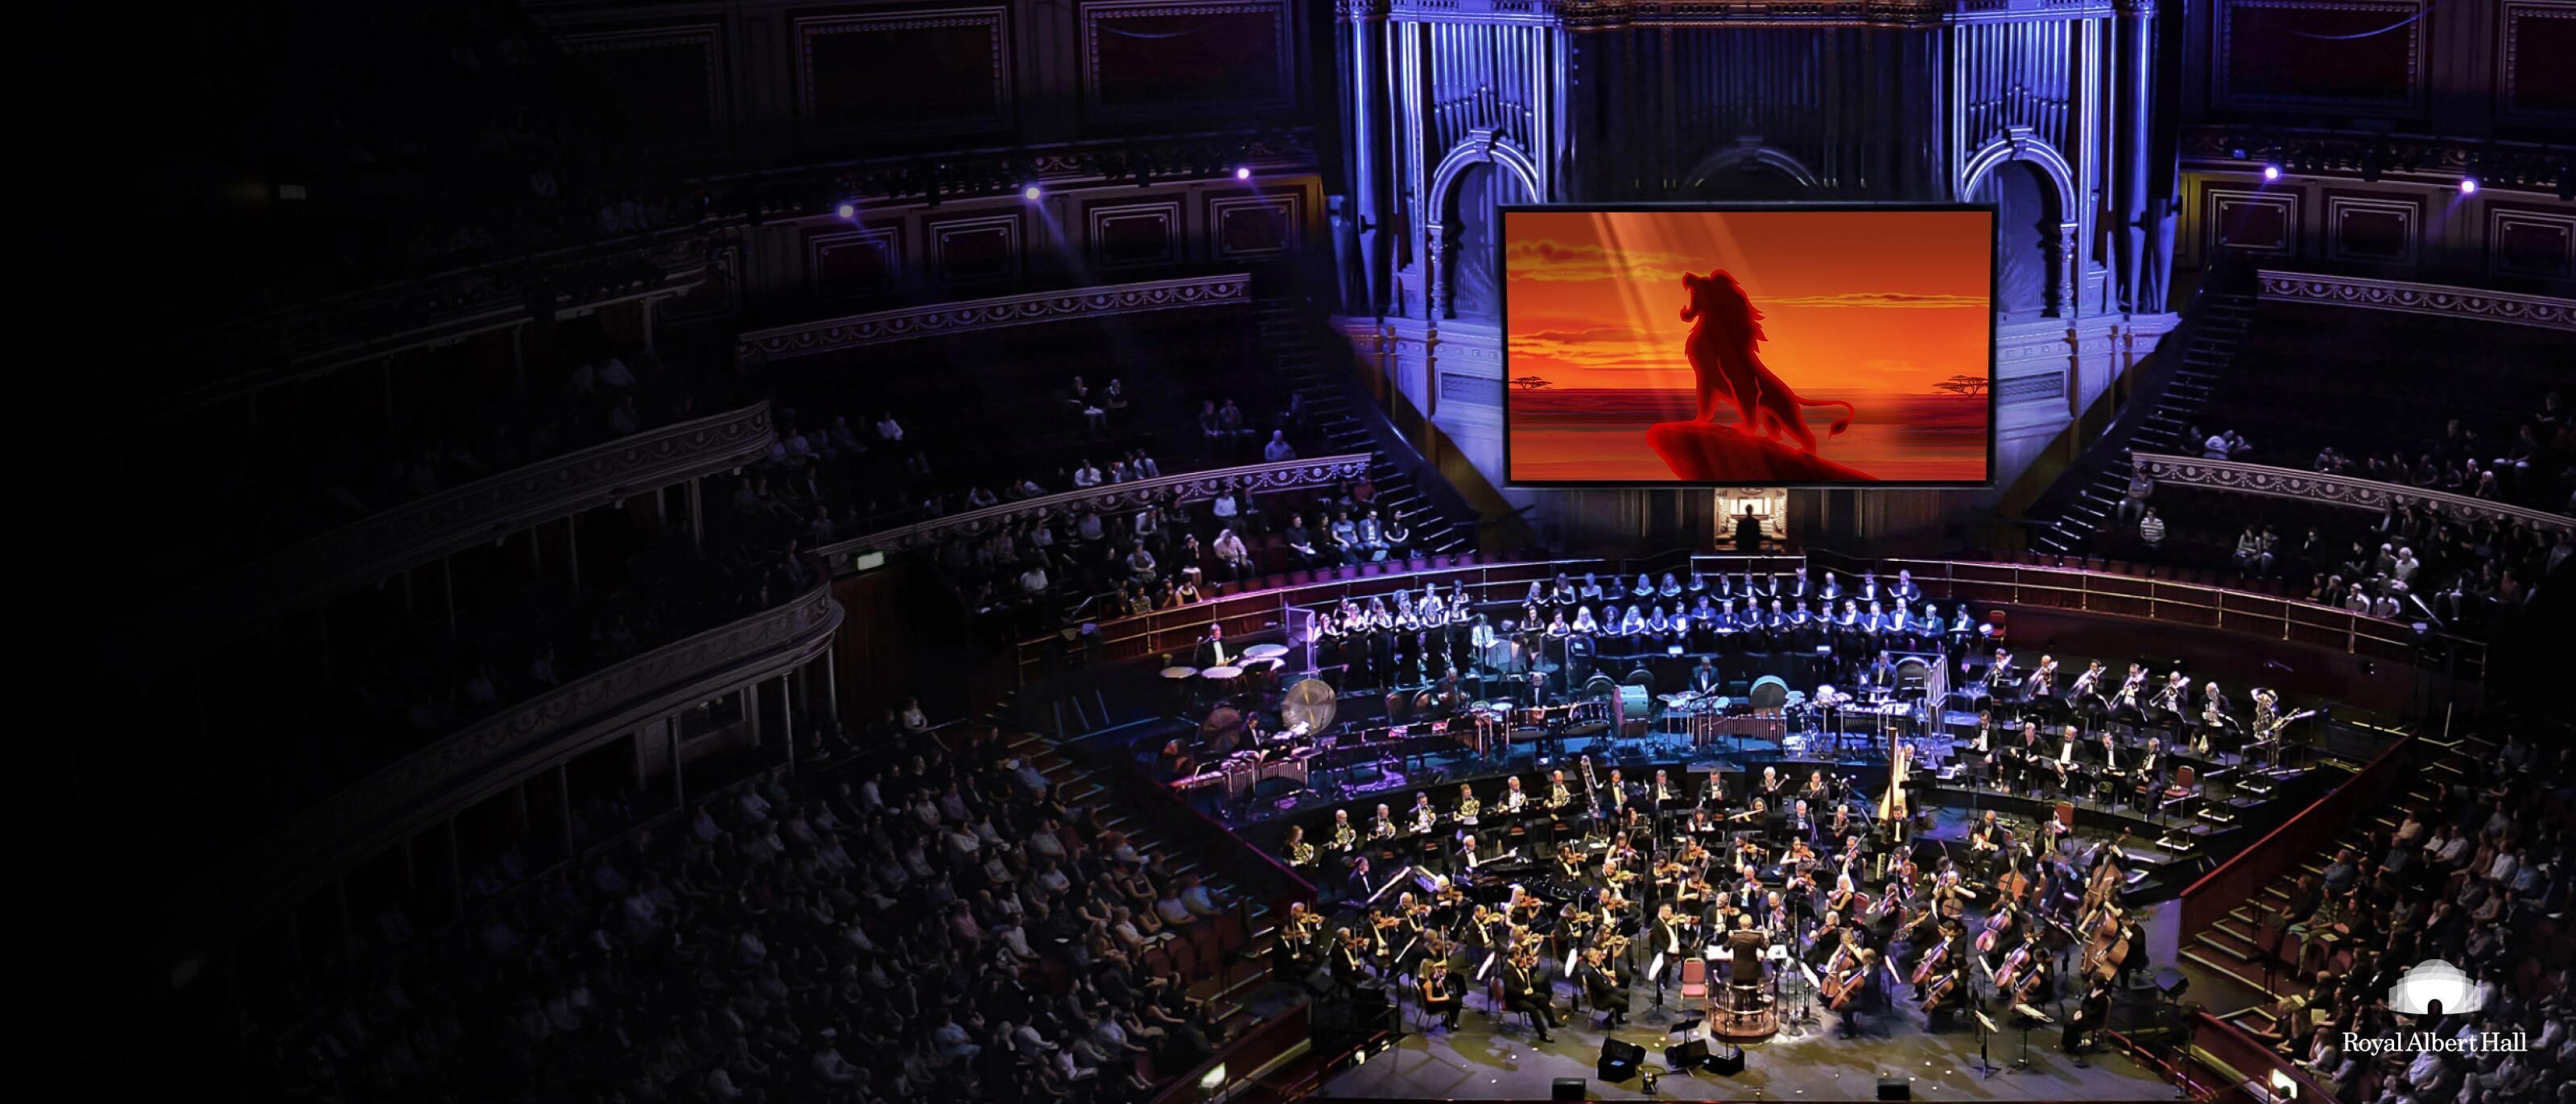 The Lion King in Concert